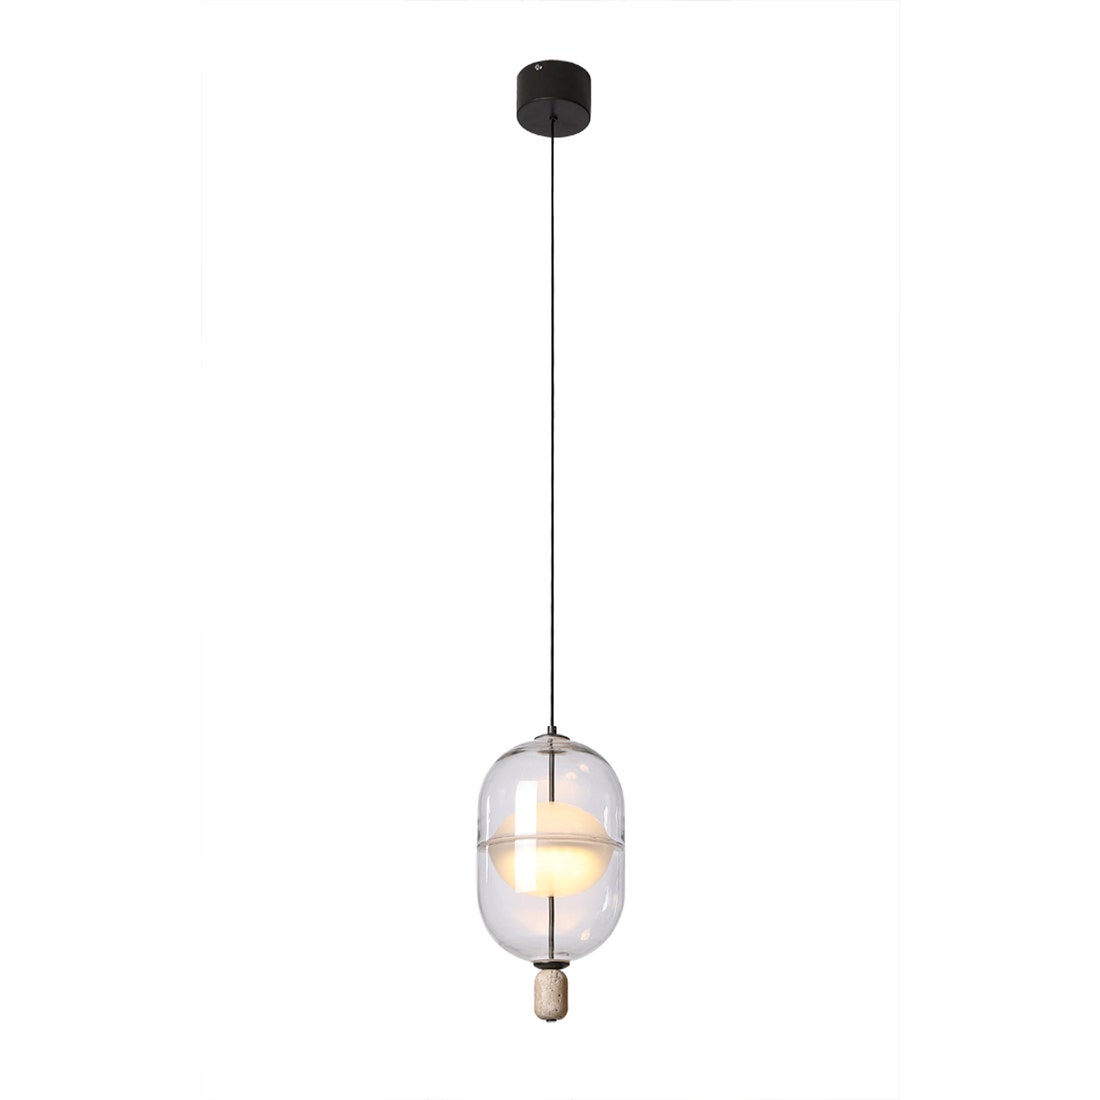 LL PENDENT LAMP#MD21940-1-220A/GLASS/MDL สีใส01